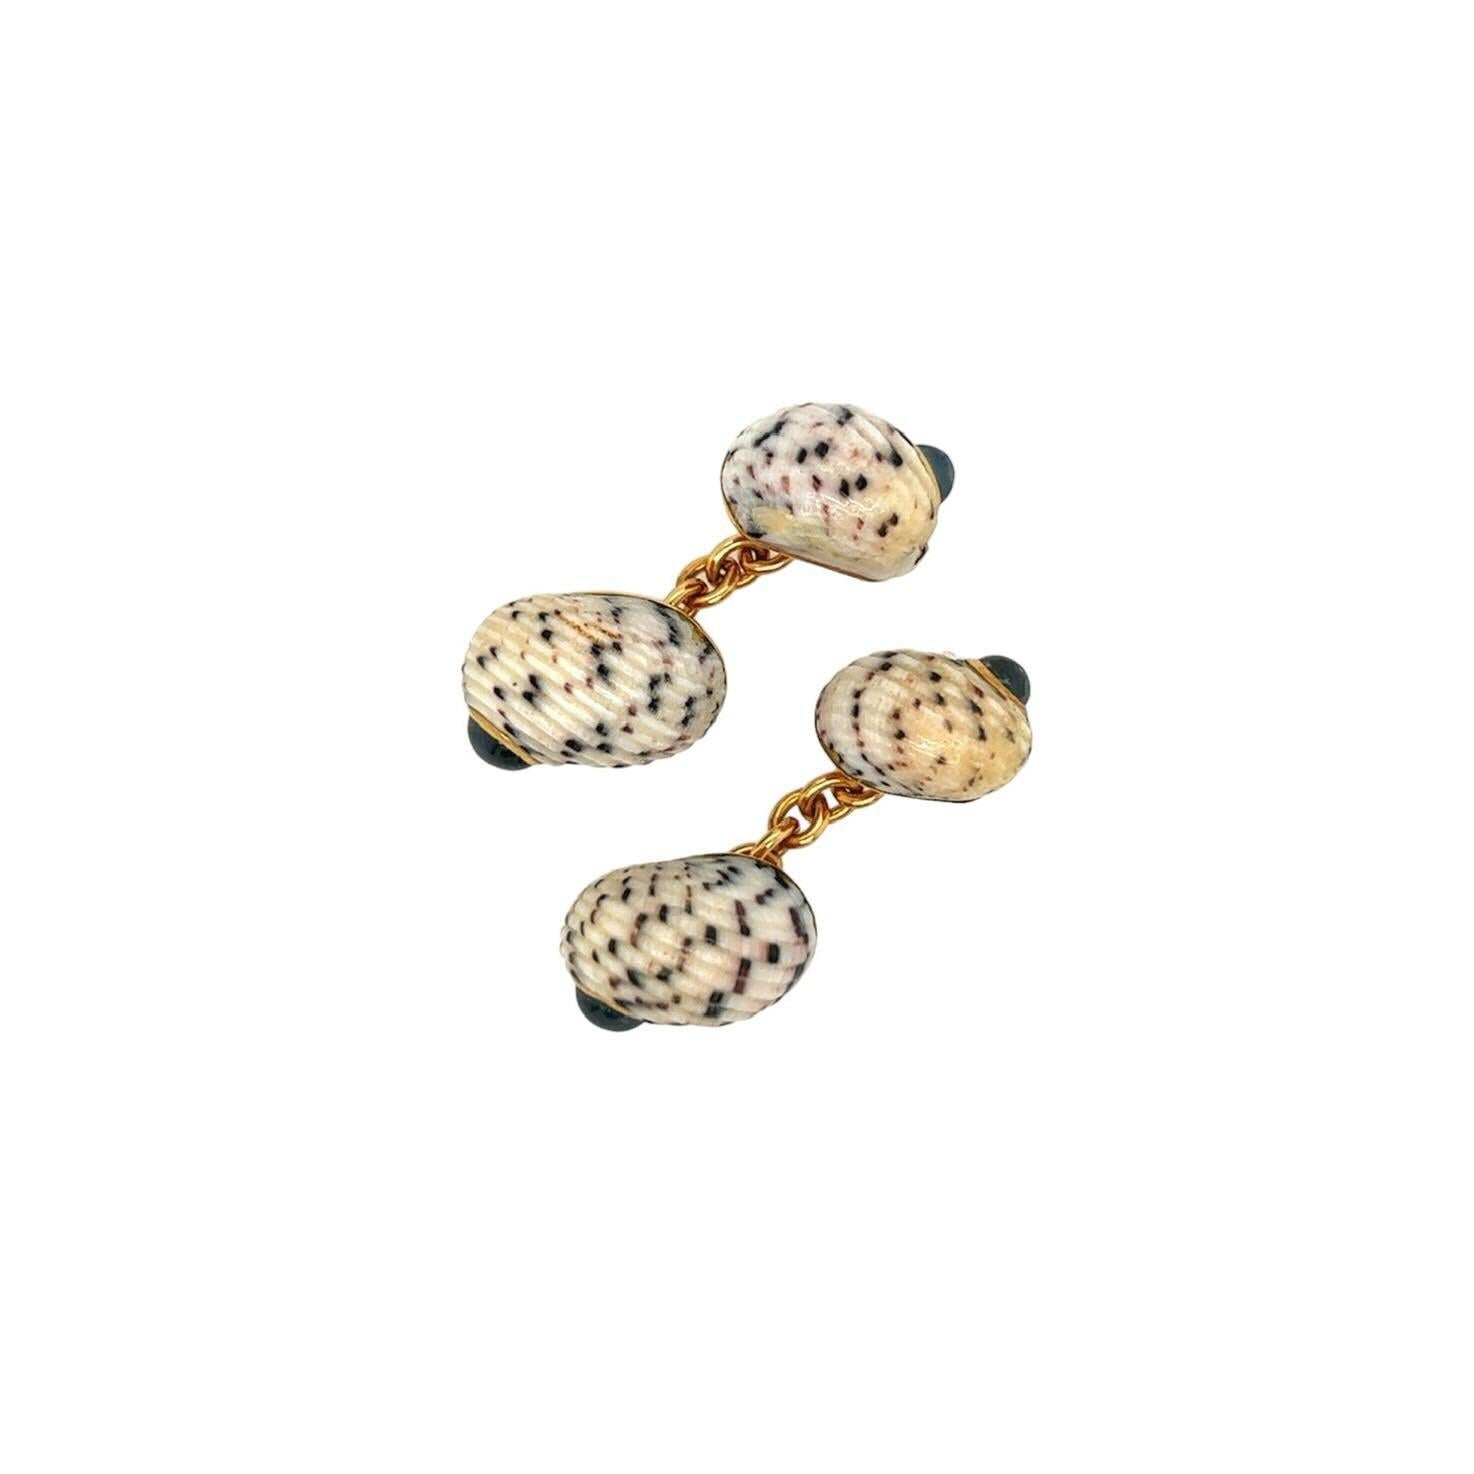  A pair of 18 karat yellow gold, speckled shell and sapphire cufflinks, signed Trianon.   